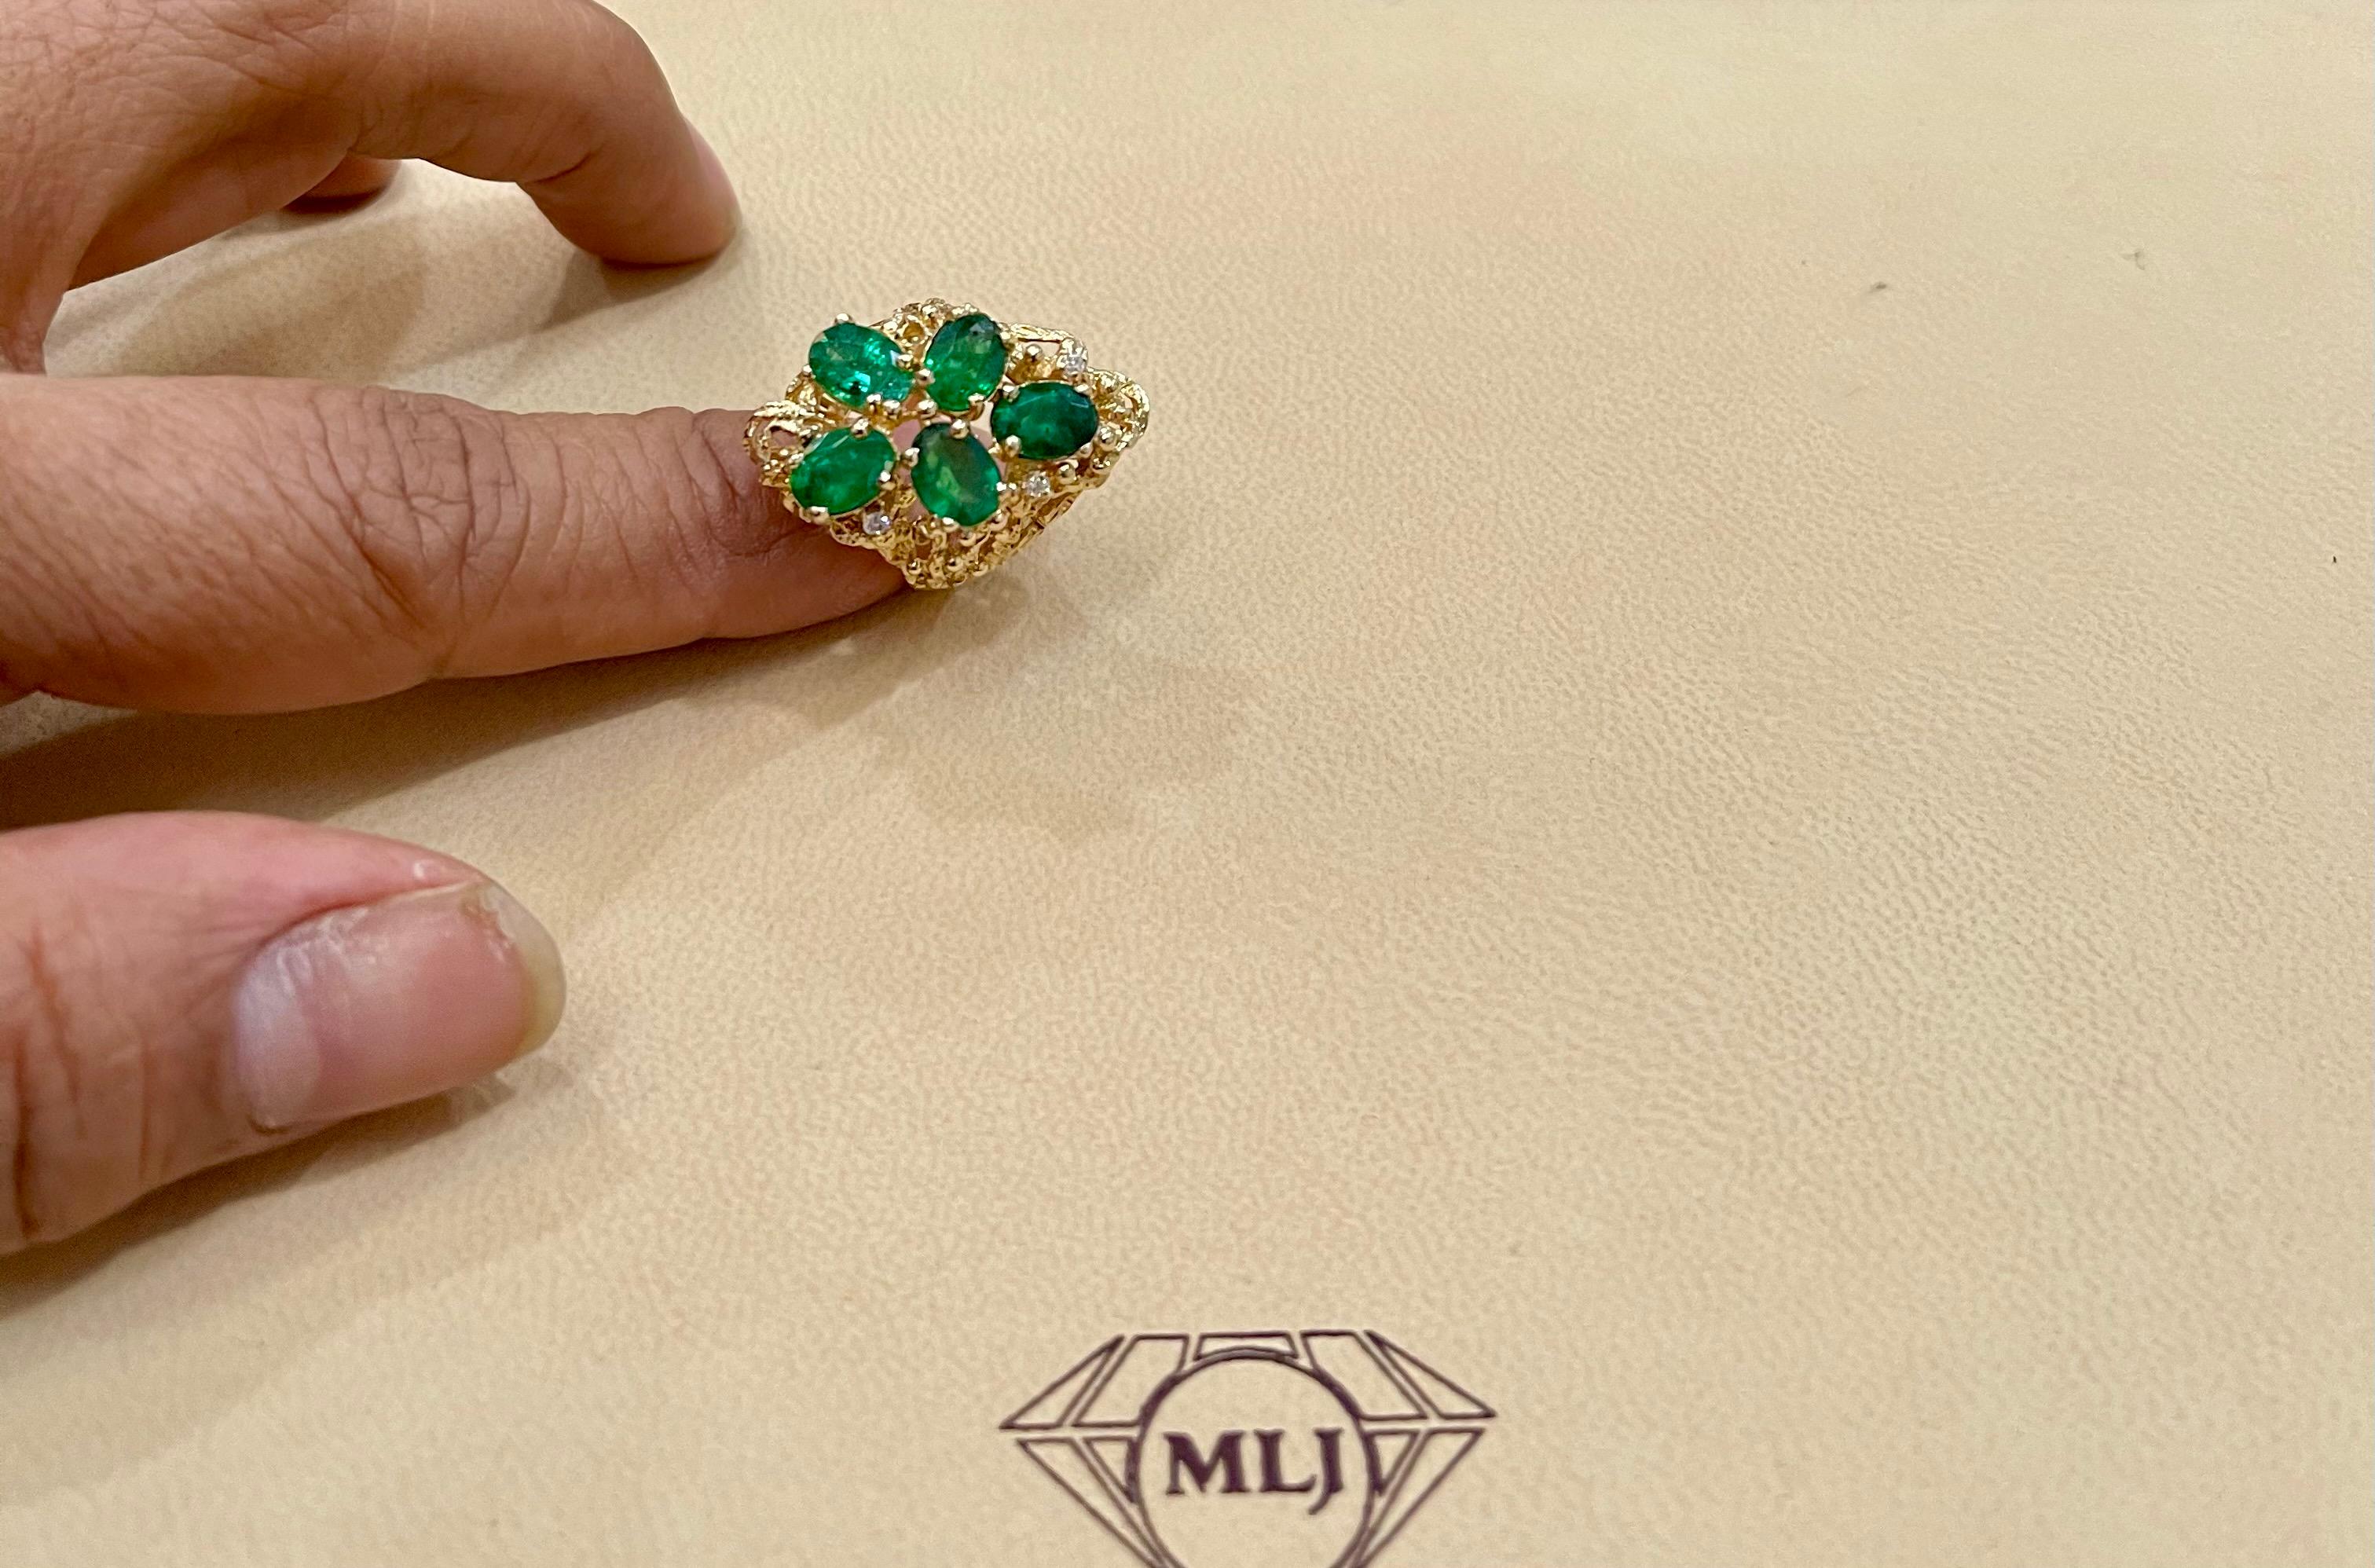 
4 Ct Natural Brazilian Emerald And Diamond Five Stone Ring 14 Karat Yellow  Gold Size 6.5
Oval Shape  Emerald Ring 
 There are Five Natural  fine quality  Oval shape emerald stones with tiny diamonds in between.
Total weight of the emeralds